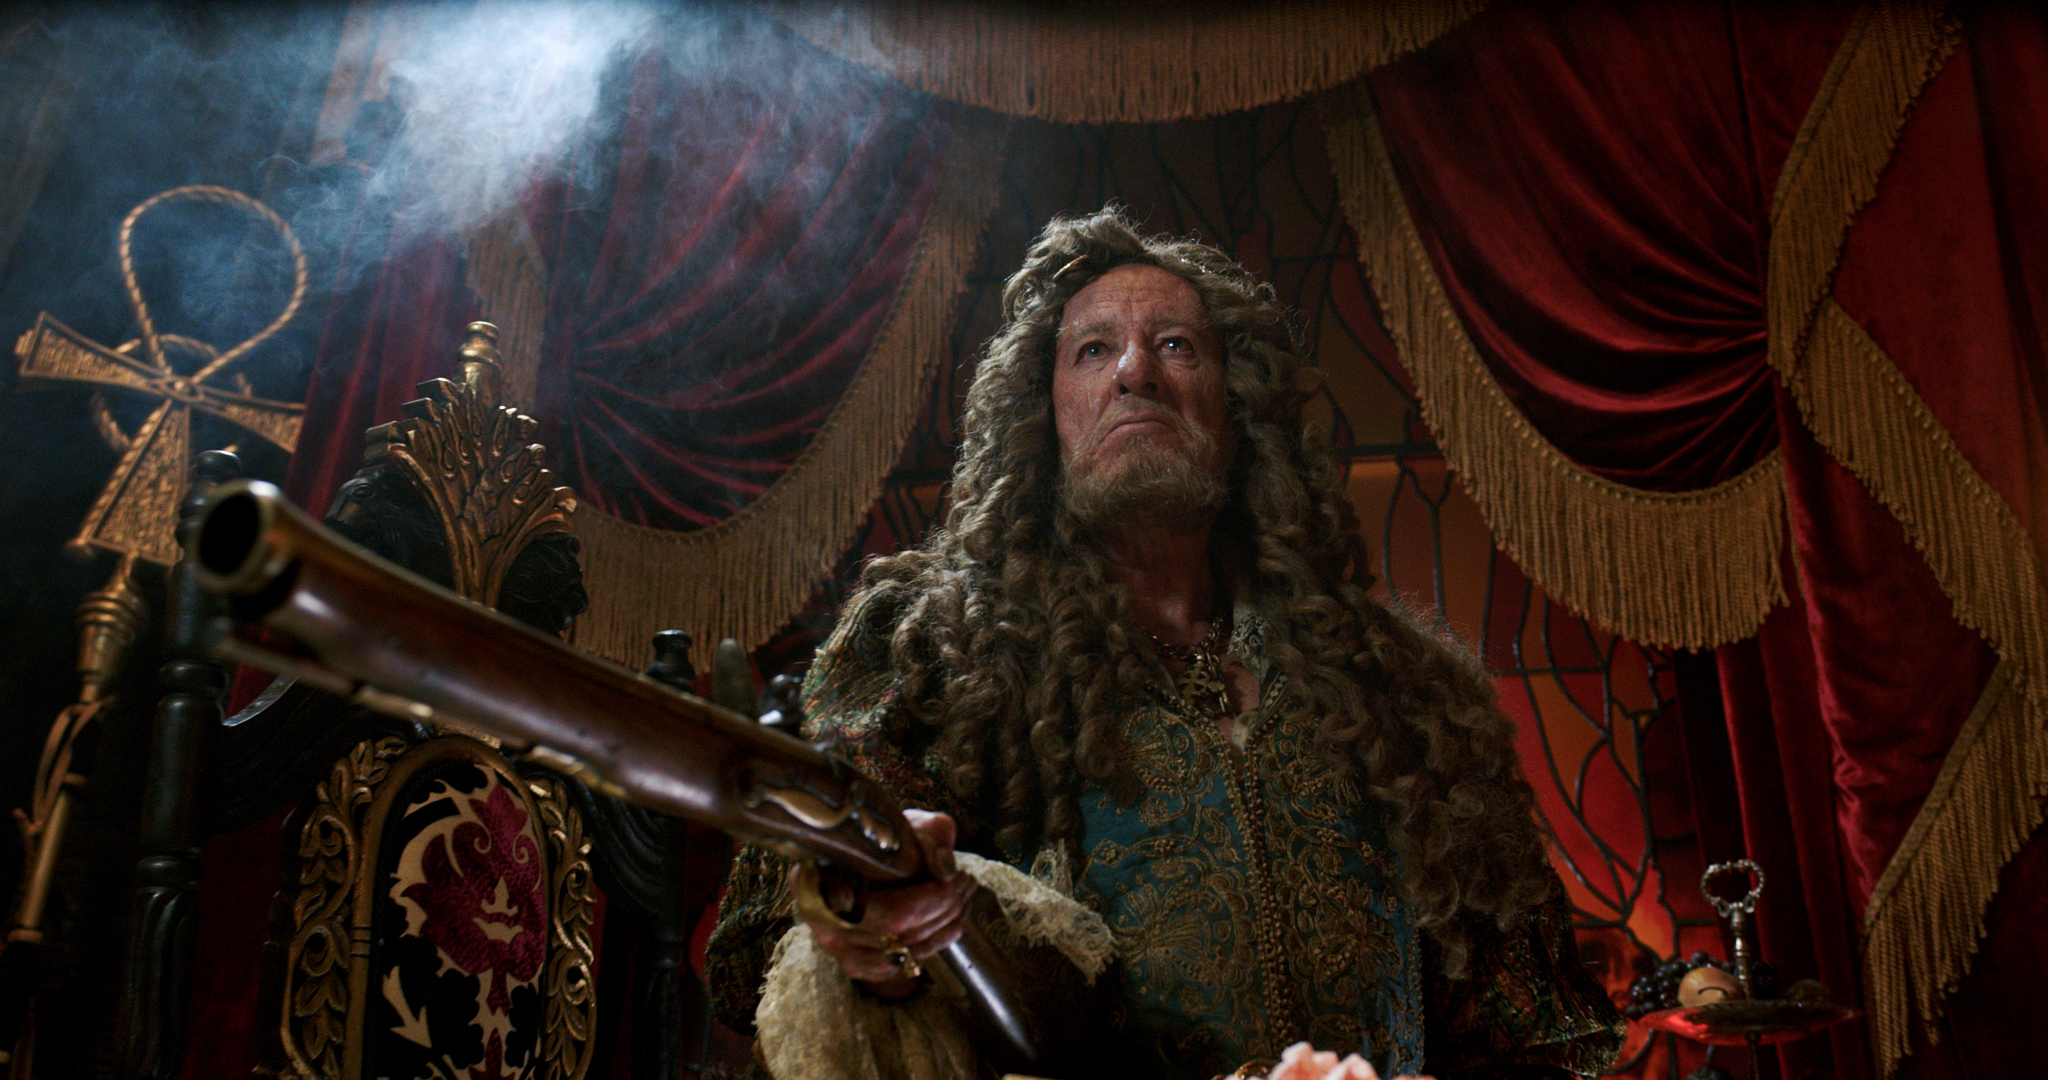 movie, pirates of the caribbean: dead men tell no tales, geoffrey rush, hector barbossa